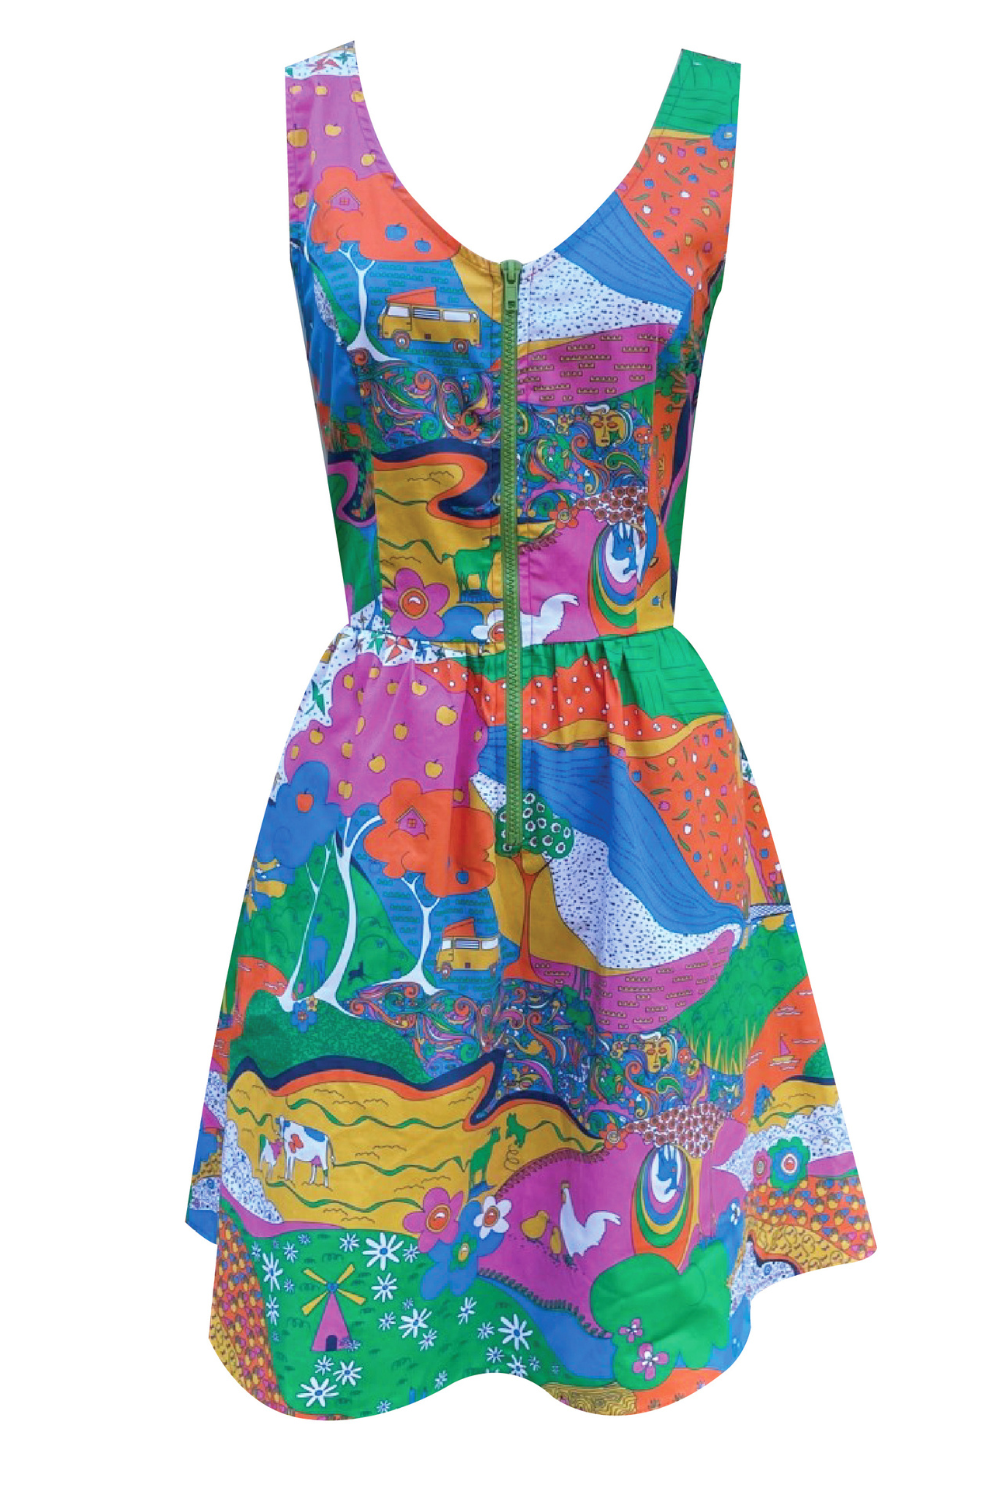 Zip-front sleeveless fit and flare multicolor dress with side pockets, animals, farms and landscape print